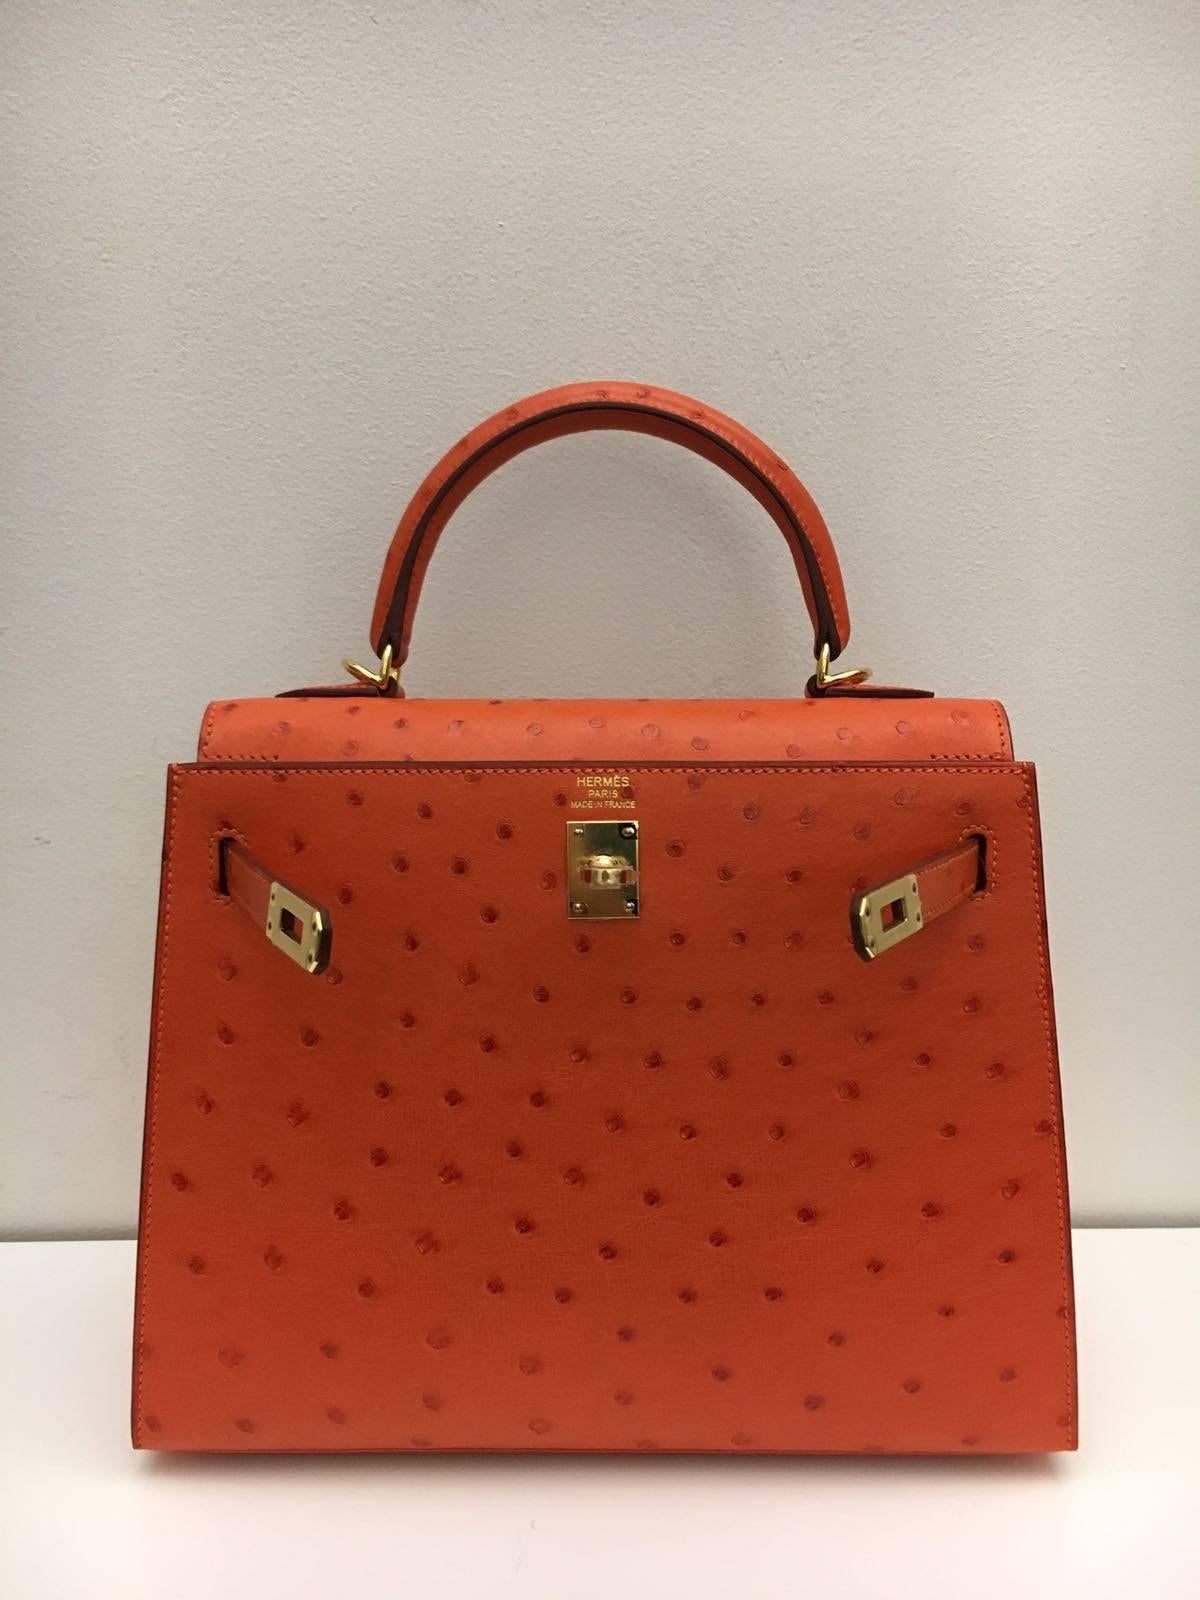 Hermes 
Kelly Size 25
Ostrich Leather 
Colour Tangerine
Gold Hardware
Store fresh, comes with receipt and full set (dust bag, box...) 
Hydeparkfashion specializes in sourcing and delivering authentic luxury handbags, mainly Hermes, to clients around